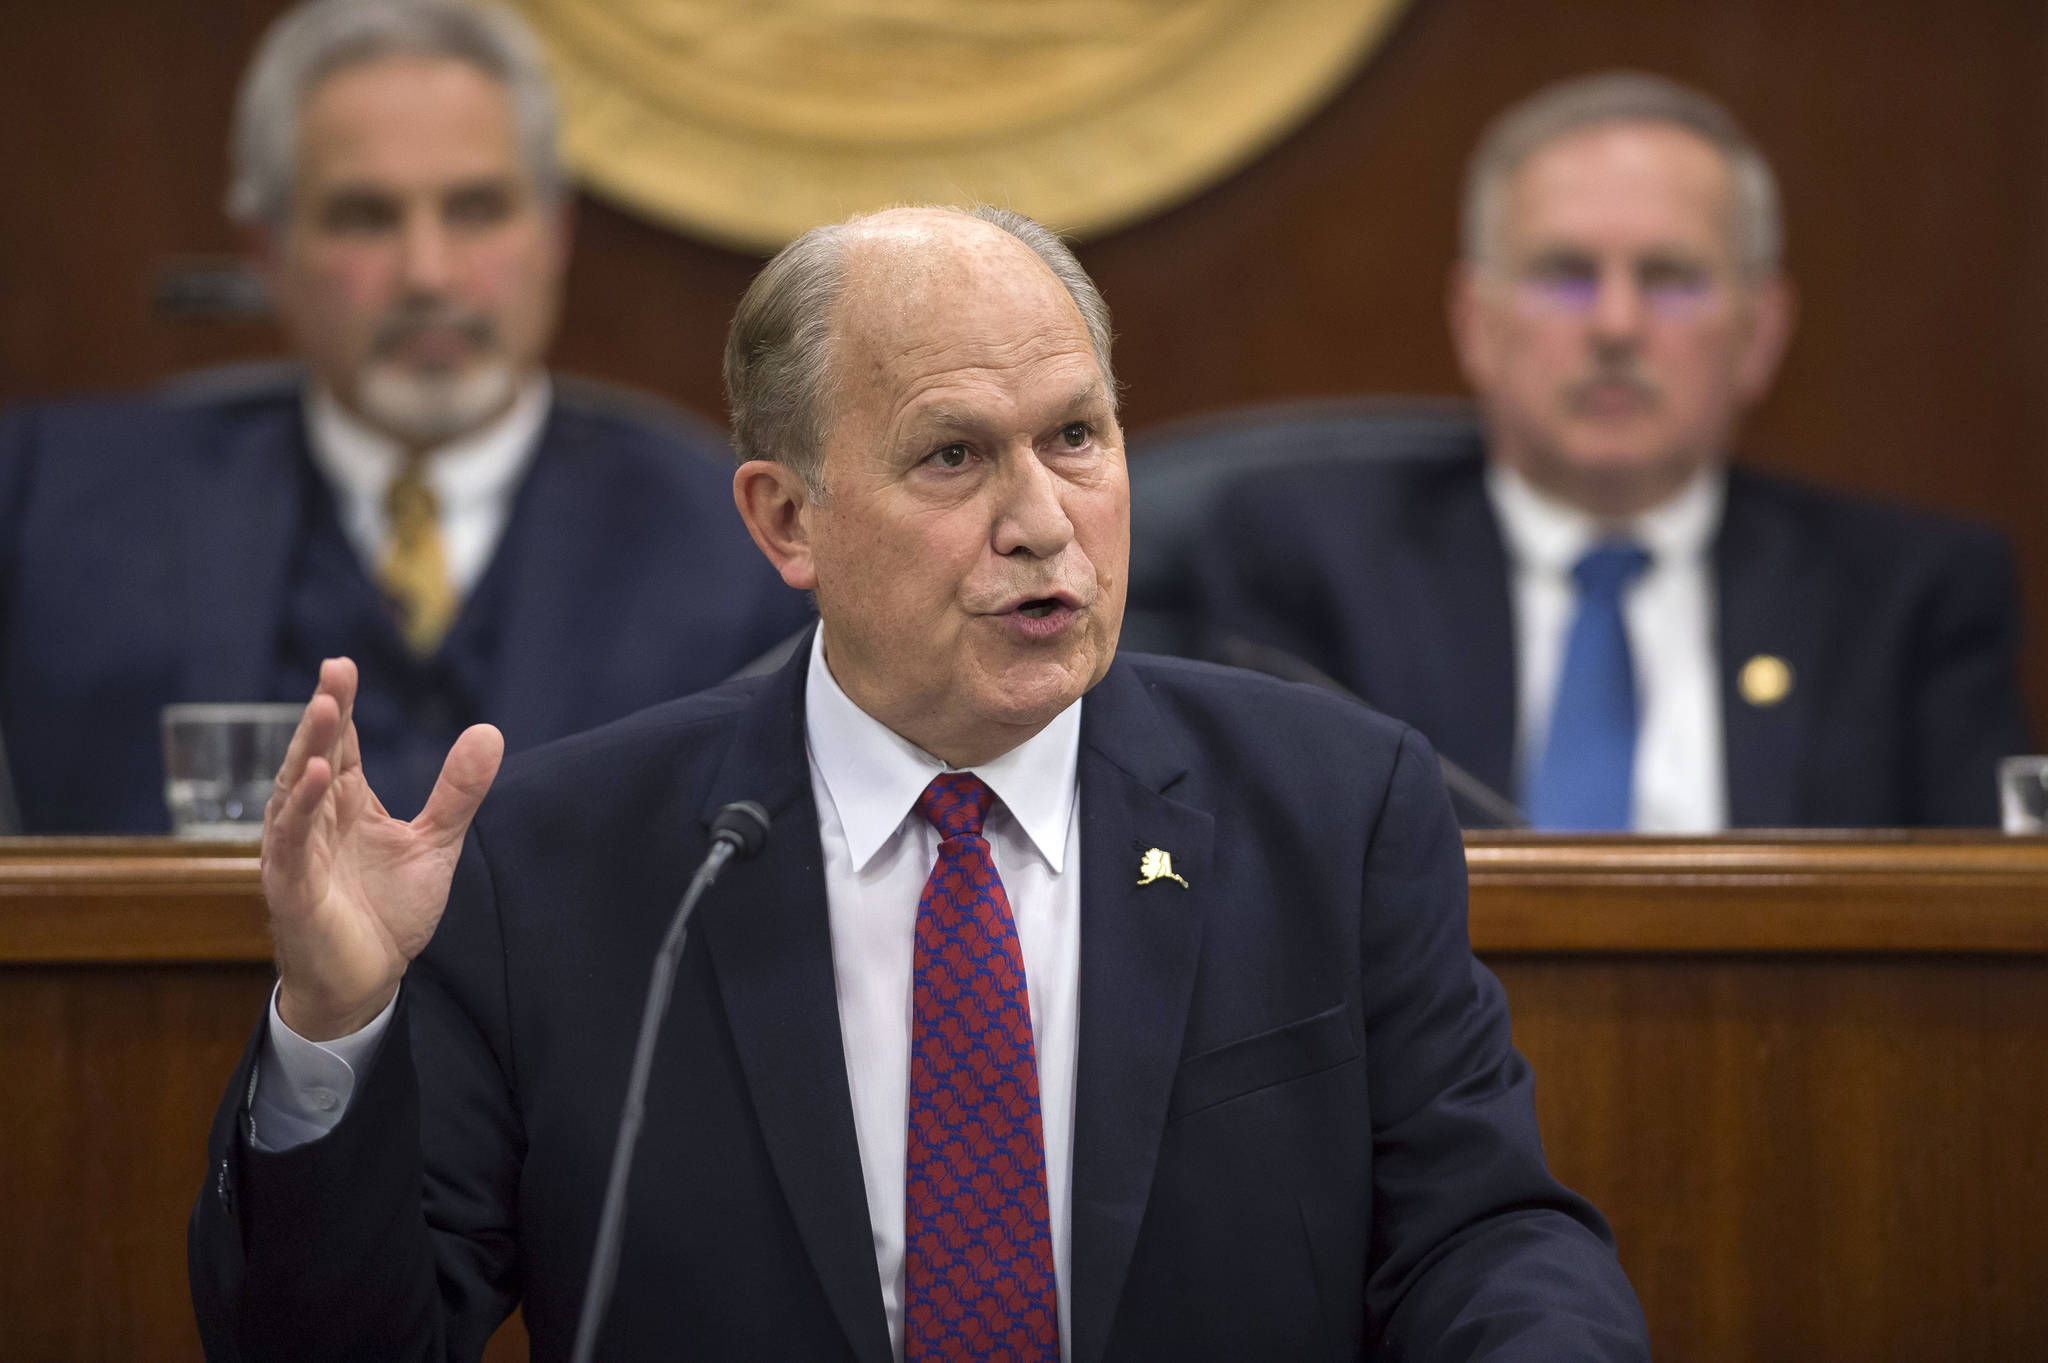 Gov. Bill Walker speaks during his State of the State address before a joint session of the Alaska Legislature at the Capitol on Thursday, Jan. 18, 2018. Senate President Pete Kelly, R-Fairbanks, left, and Speaker of the House Bryce Edgmon, D-Dillingham, watch from the Speakers desk in the background. (Michael Penn | Juneau Empire)